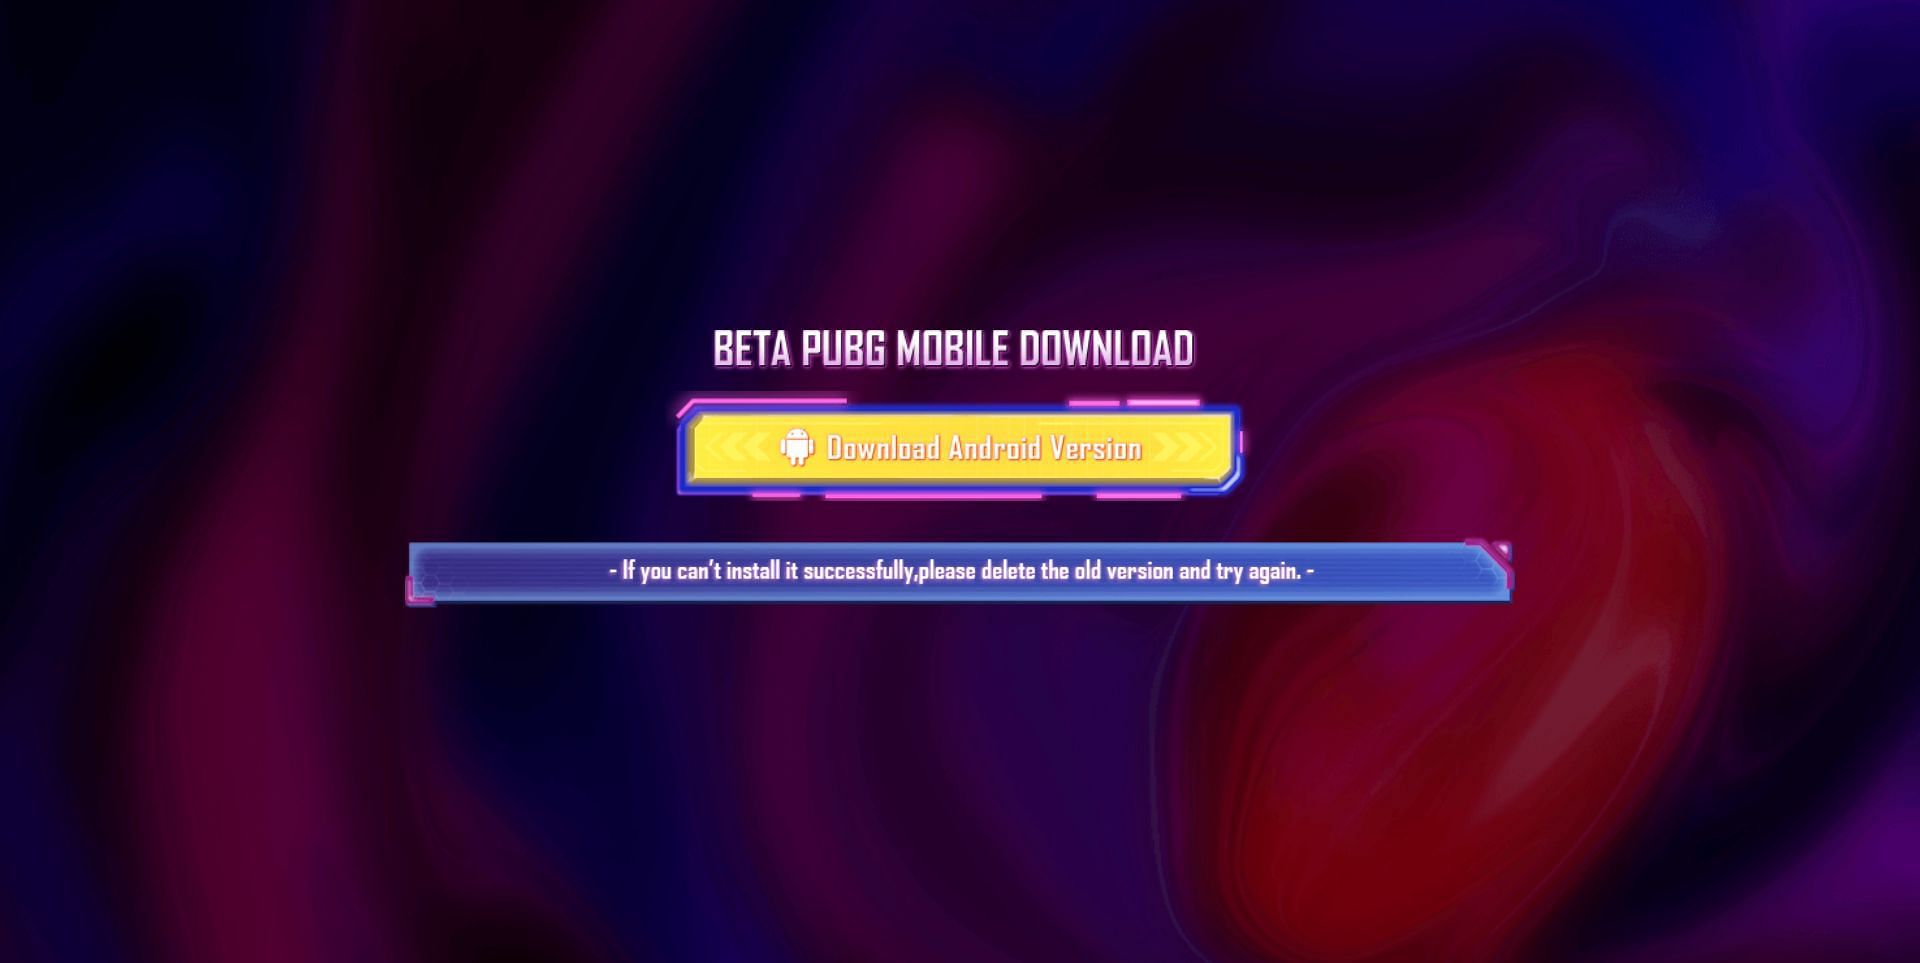 Press the button in the center to download the APK (Image via Tencent)